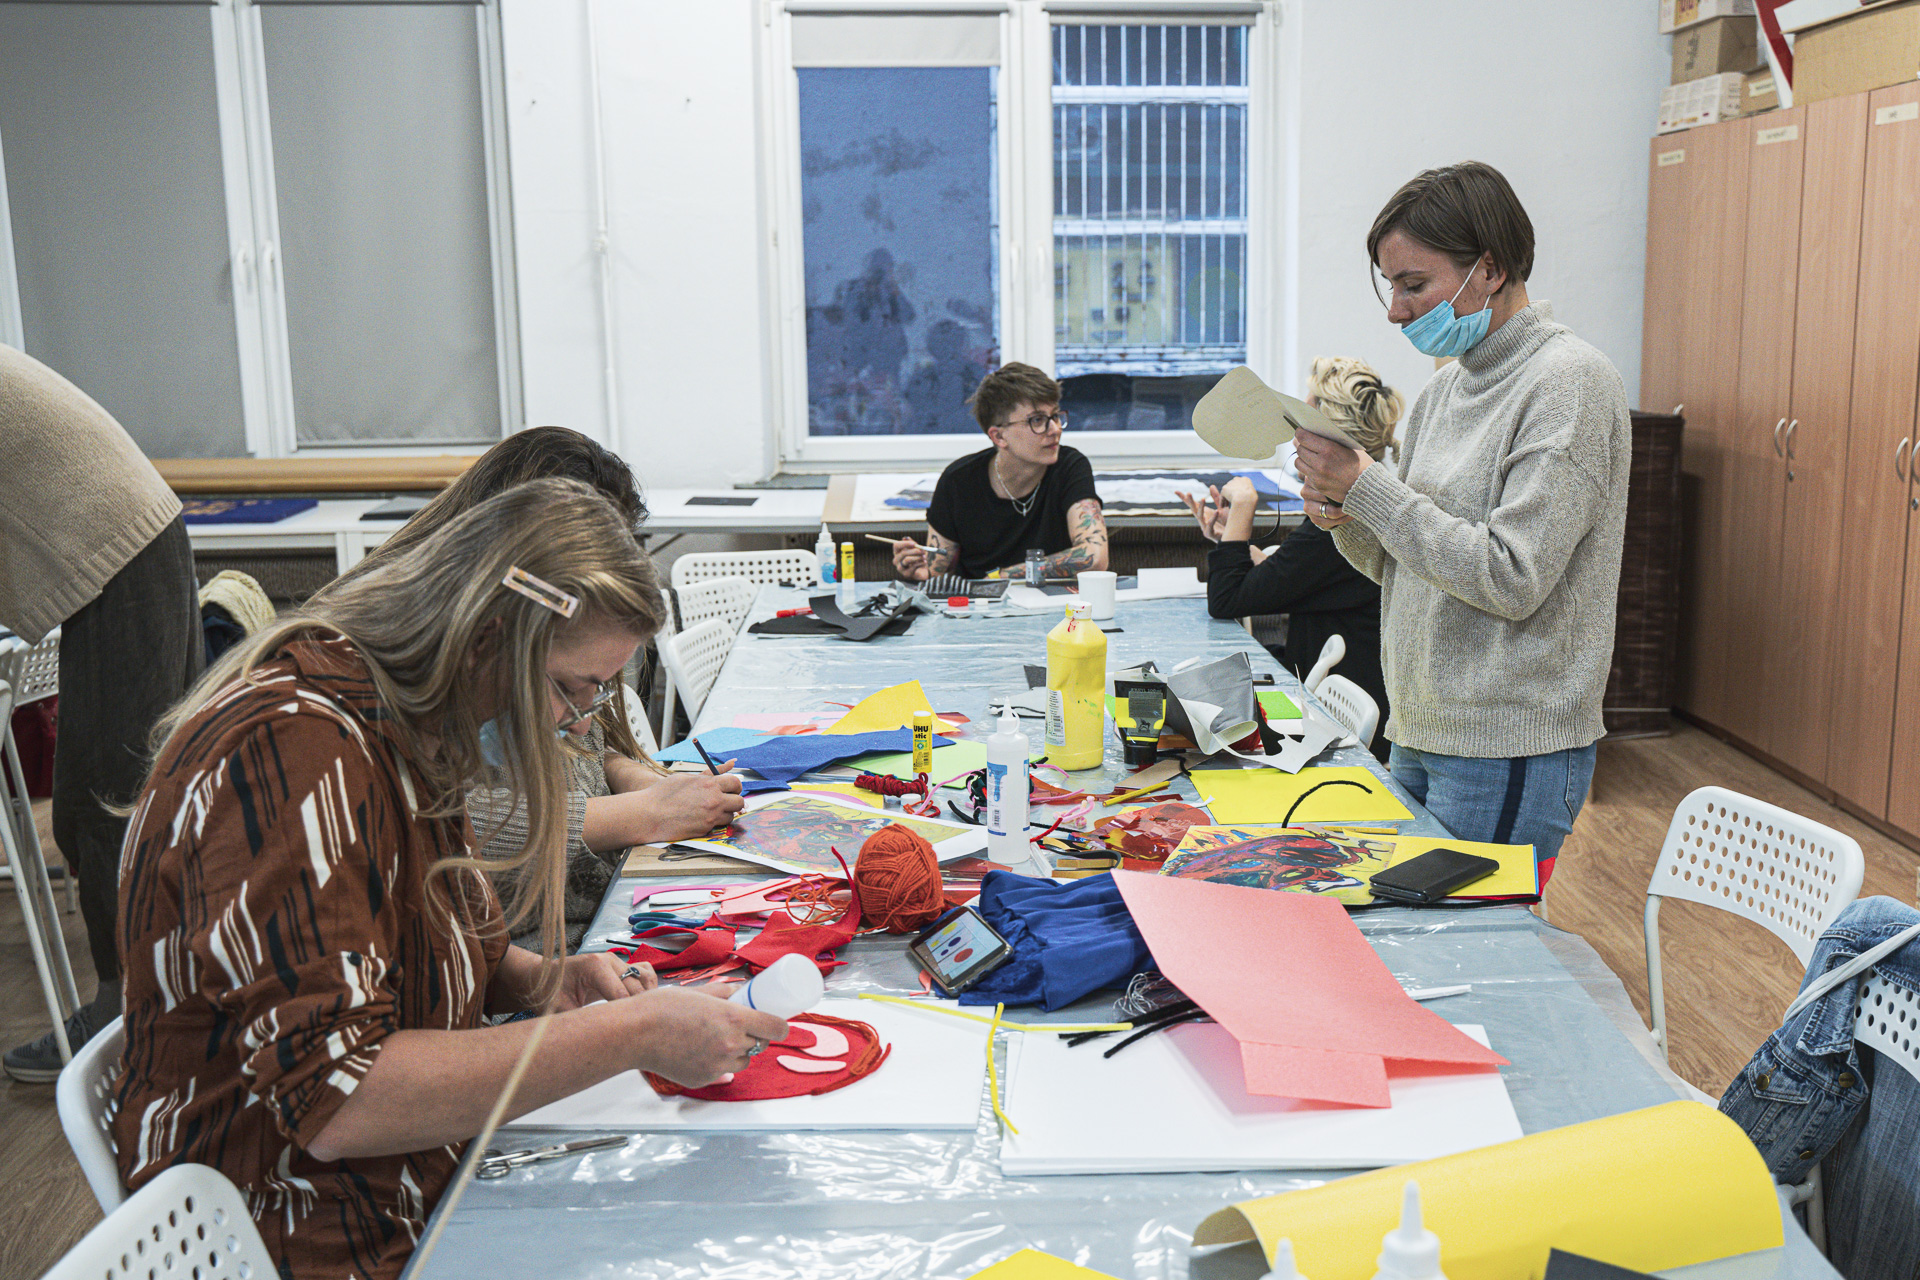 Training course in creating tactile diagrams. Conducted by Ewa Niestorowicz, September 2021